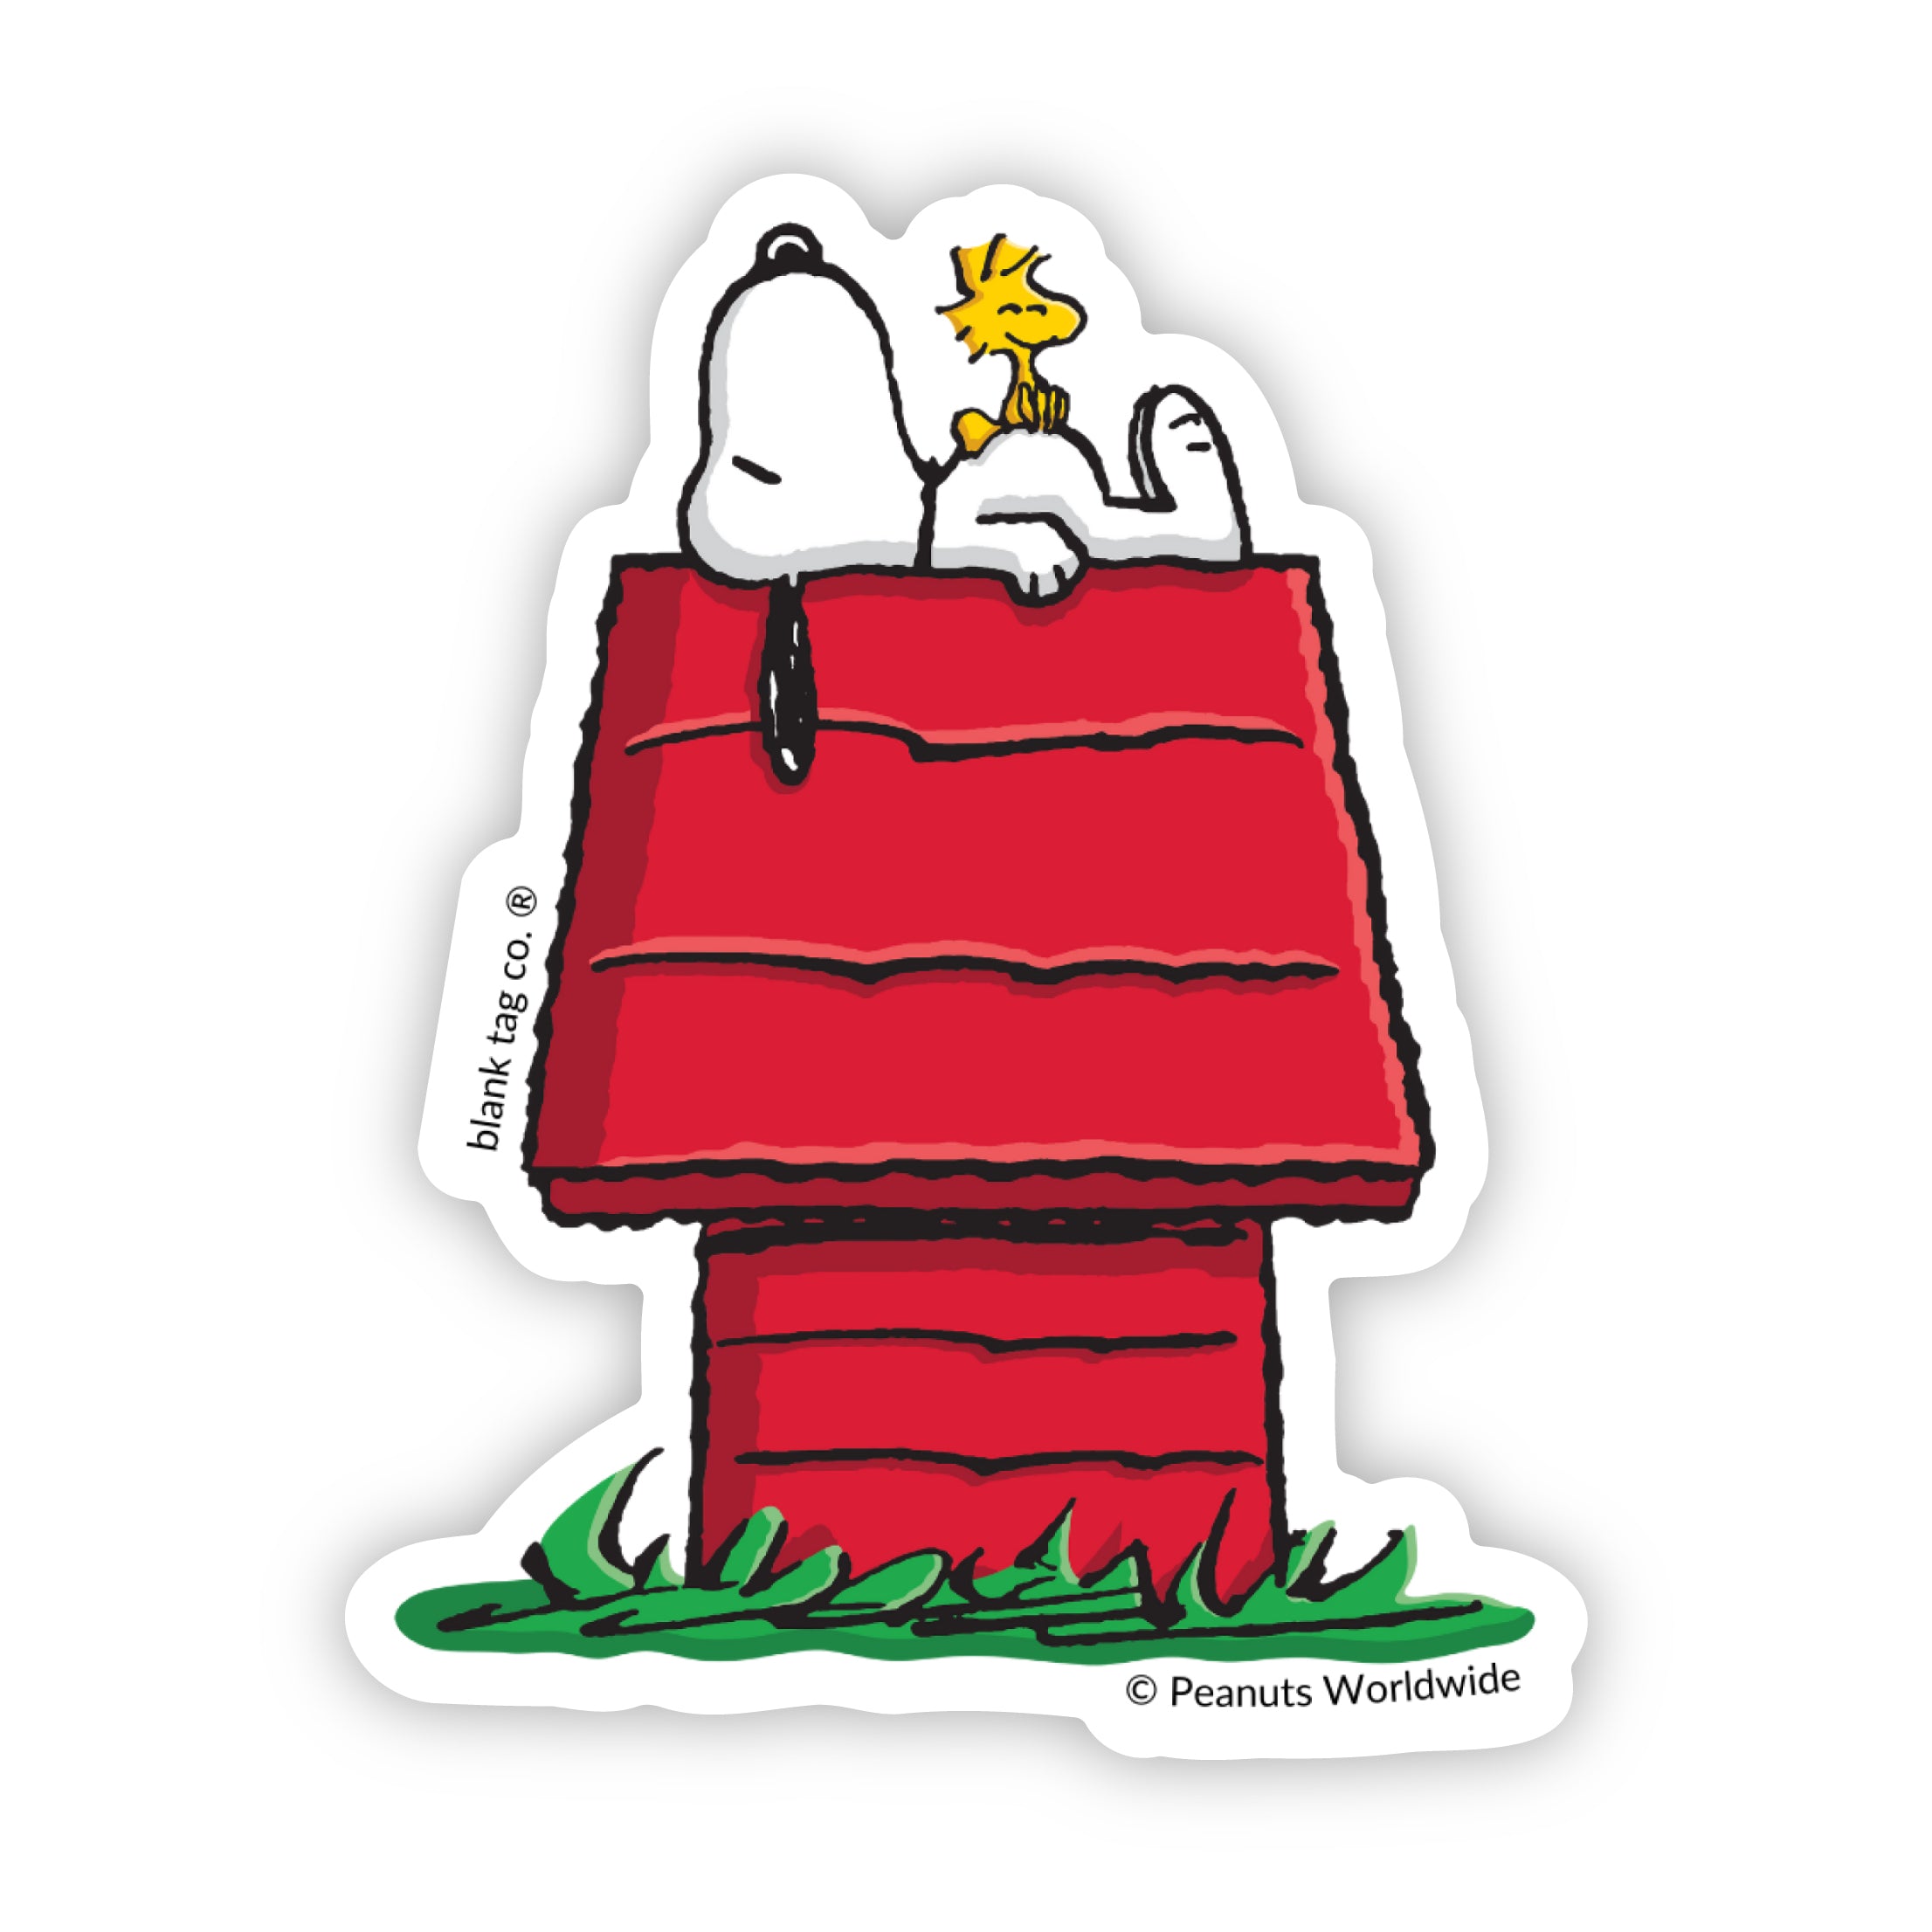 The Snoopy and Woodstock Sticker